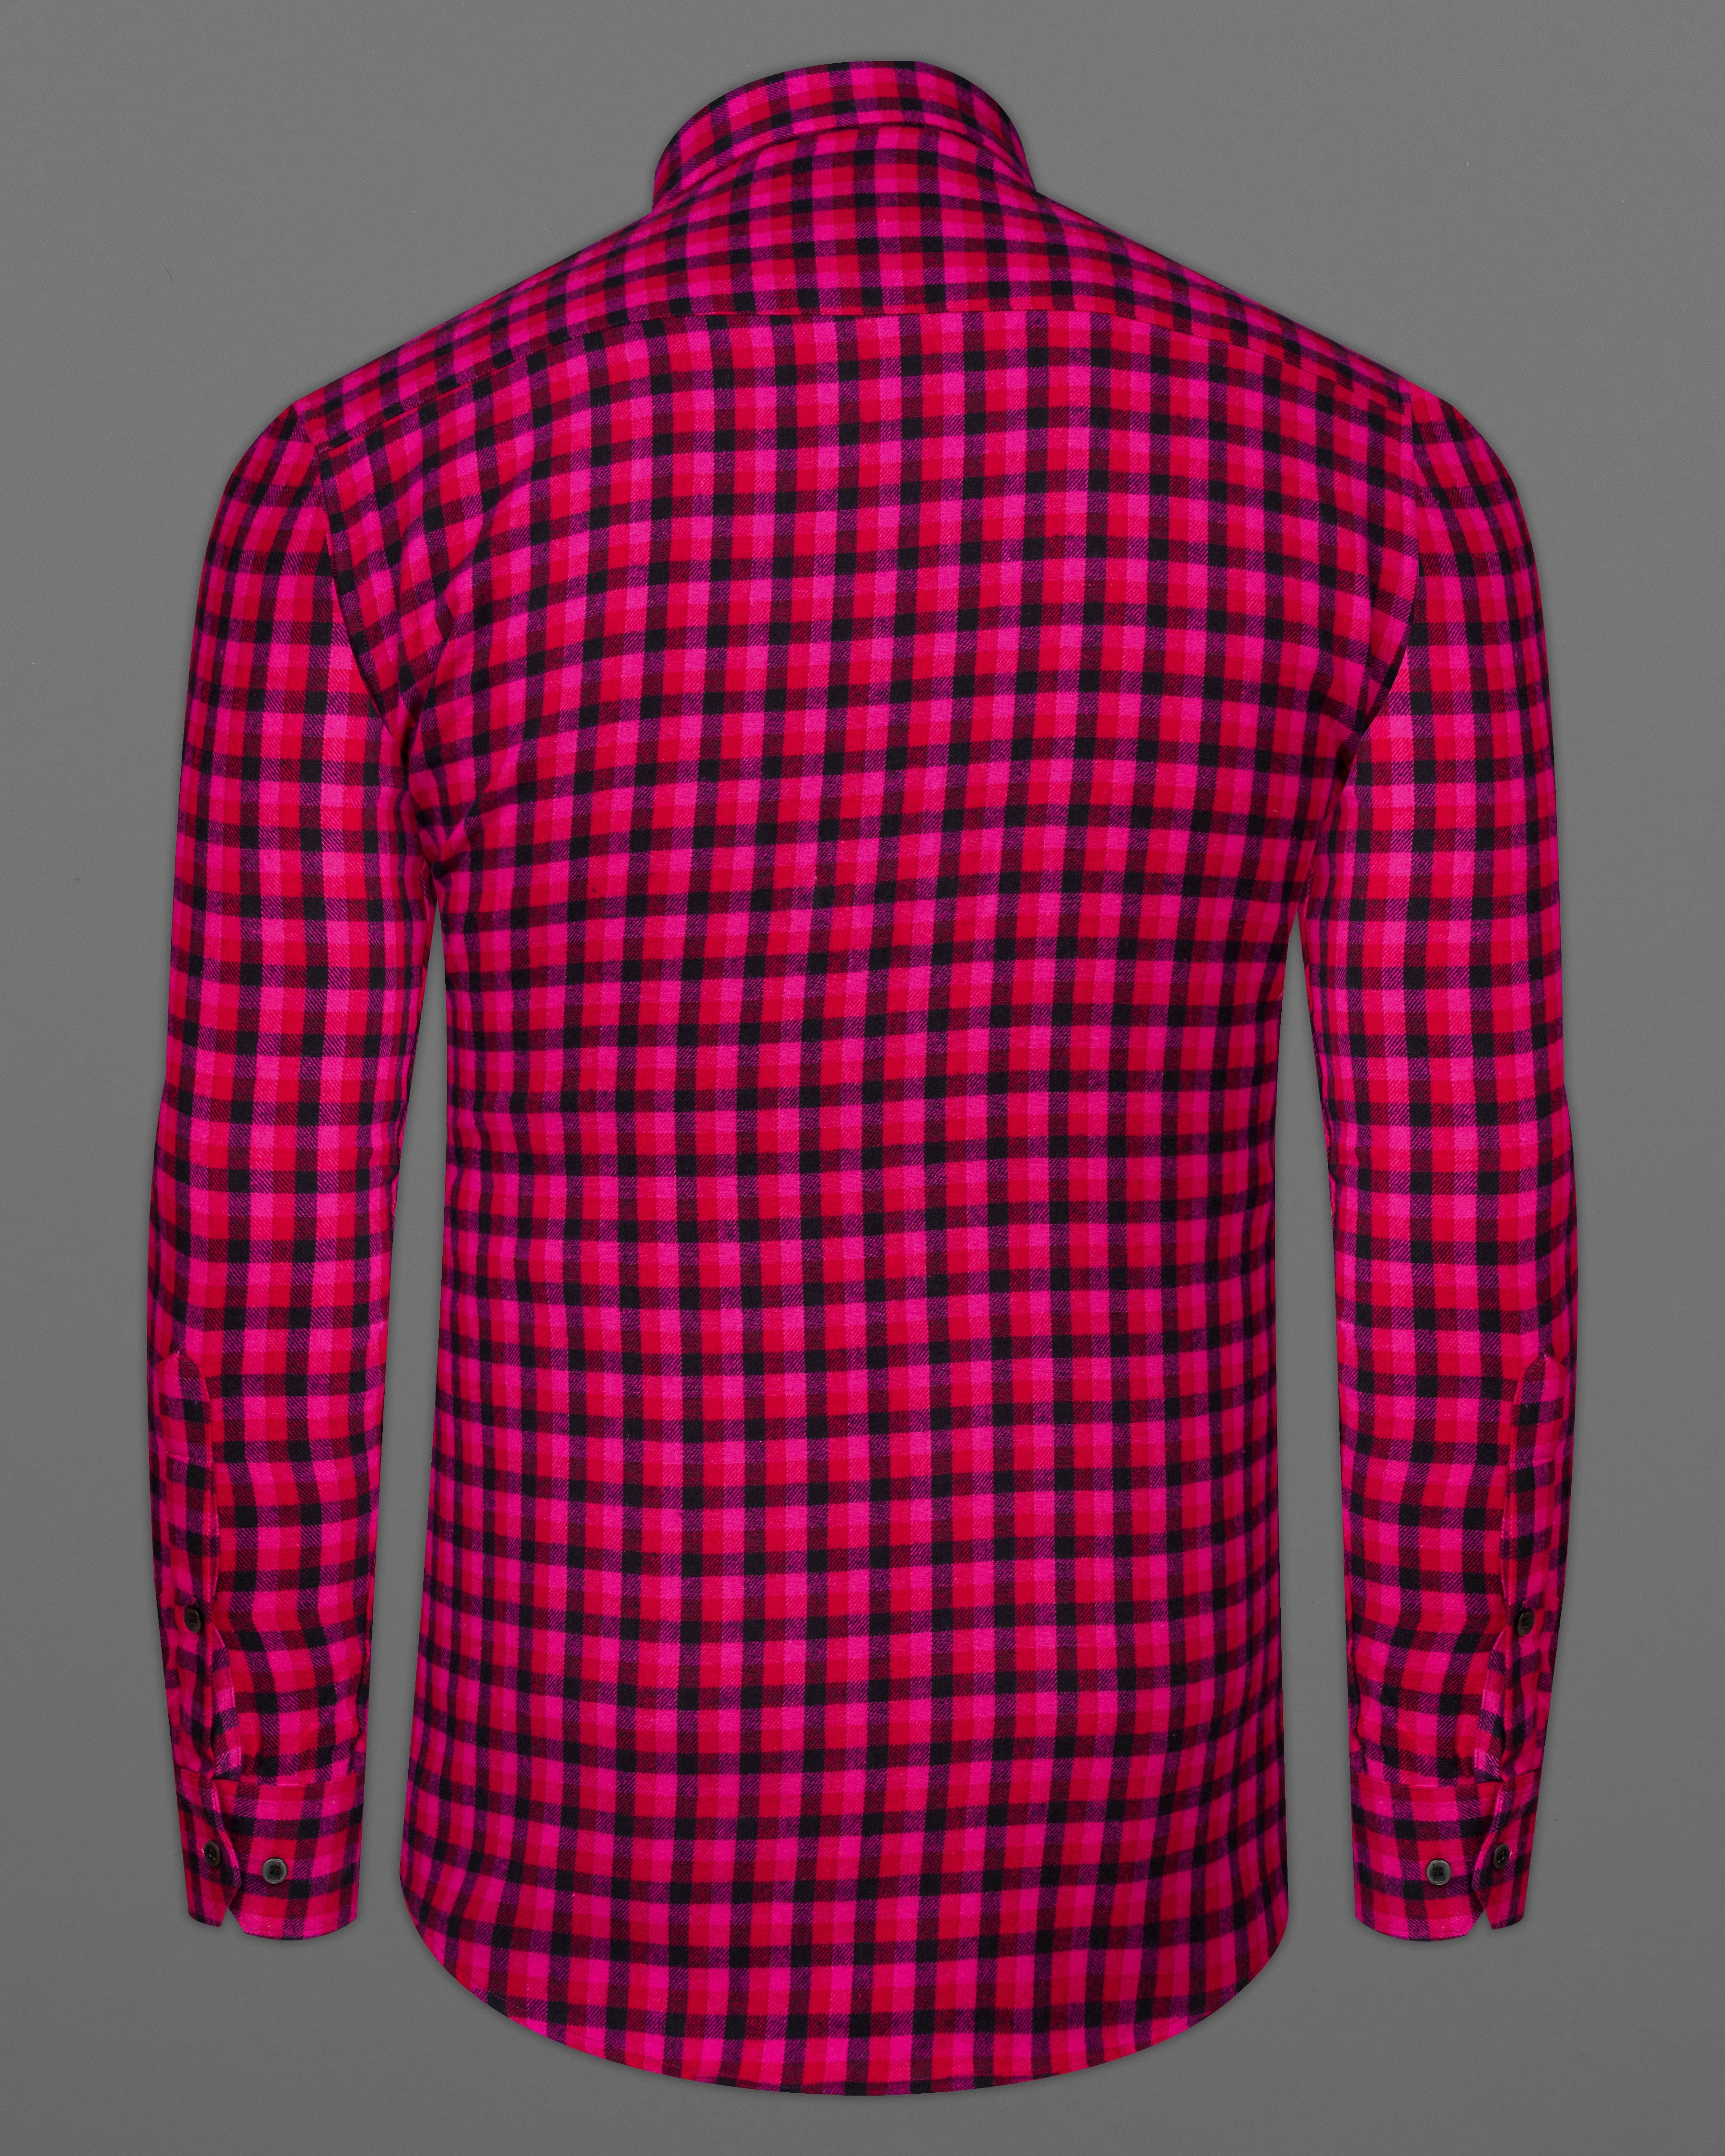 Raspberry Red with Black Checkered Flannel Shirt 9691-BLK-38, 9691-BLK-H-38, 9691-BLK-39, 9691-BLK-H-39, 9691-BLK-40, 9691-BLK-H-40, 9691-BLK-42, 9691-BLK-H-42, 9691-BLK-44, 9691-BLK-H-44, 9691-BLK-46, 9691-BLK-H-46, 9691-BLK-48, 9691-BLK-H-48, 9691-BLK-50, 9691-BLK-H-50, 9691-BLK-52, 9691-BLK-H-52